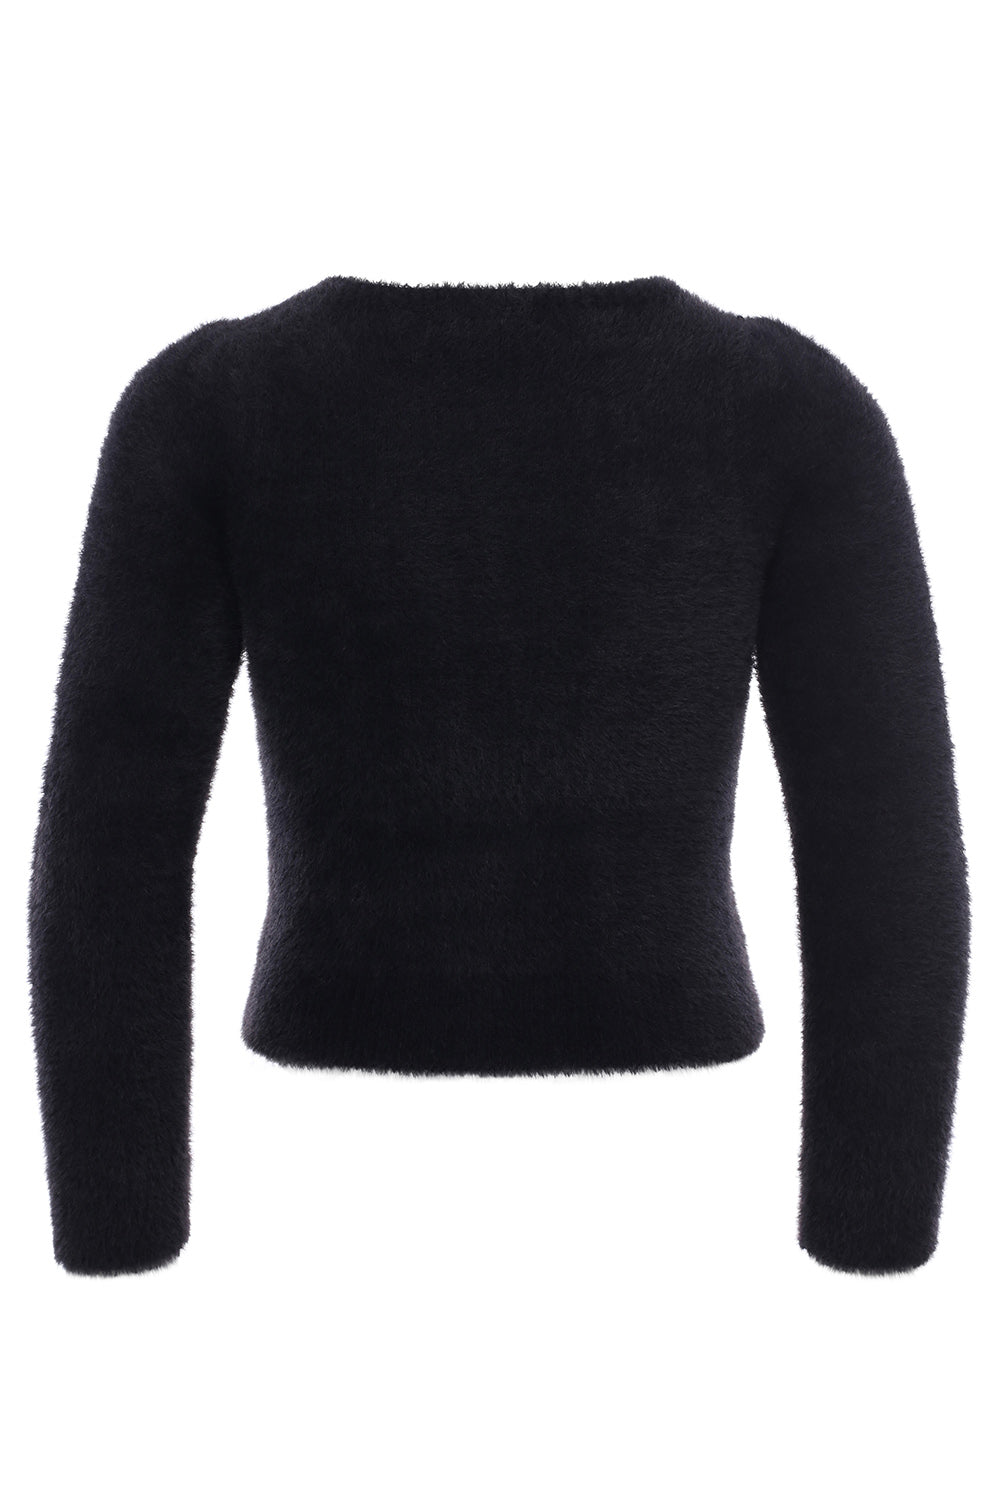 Looxs 10sixteen Cropped Pullover